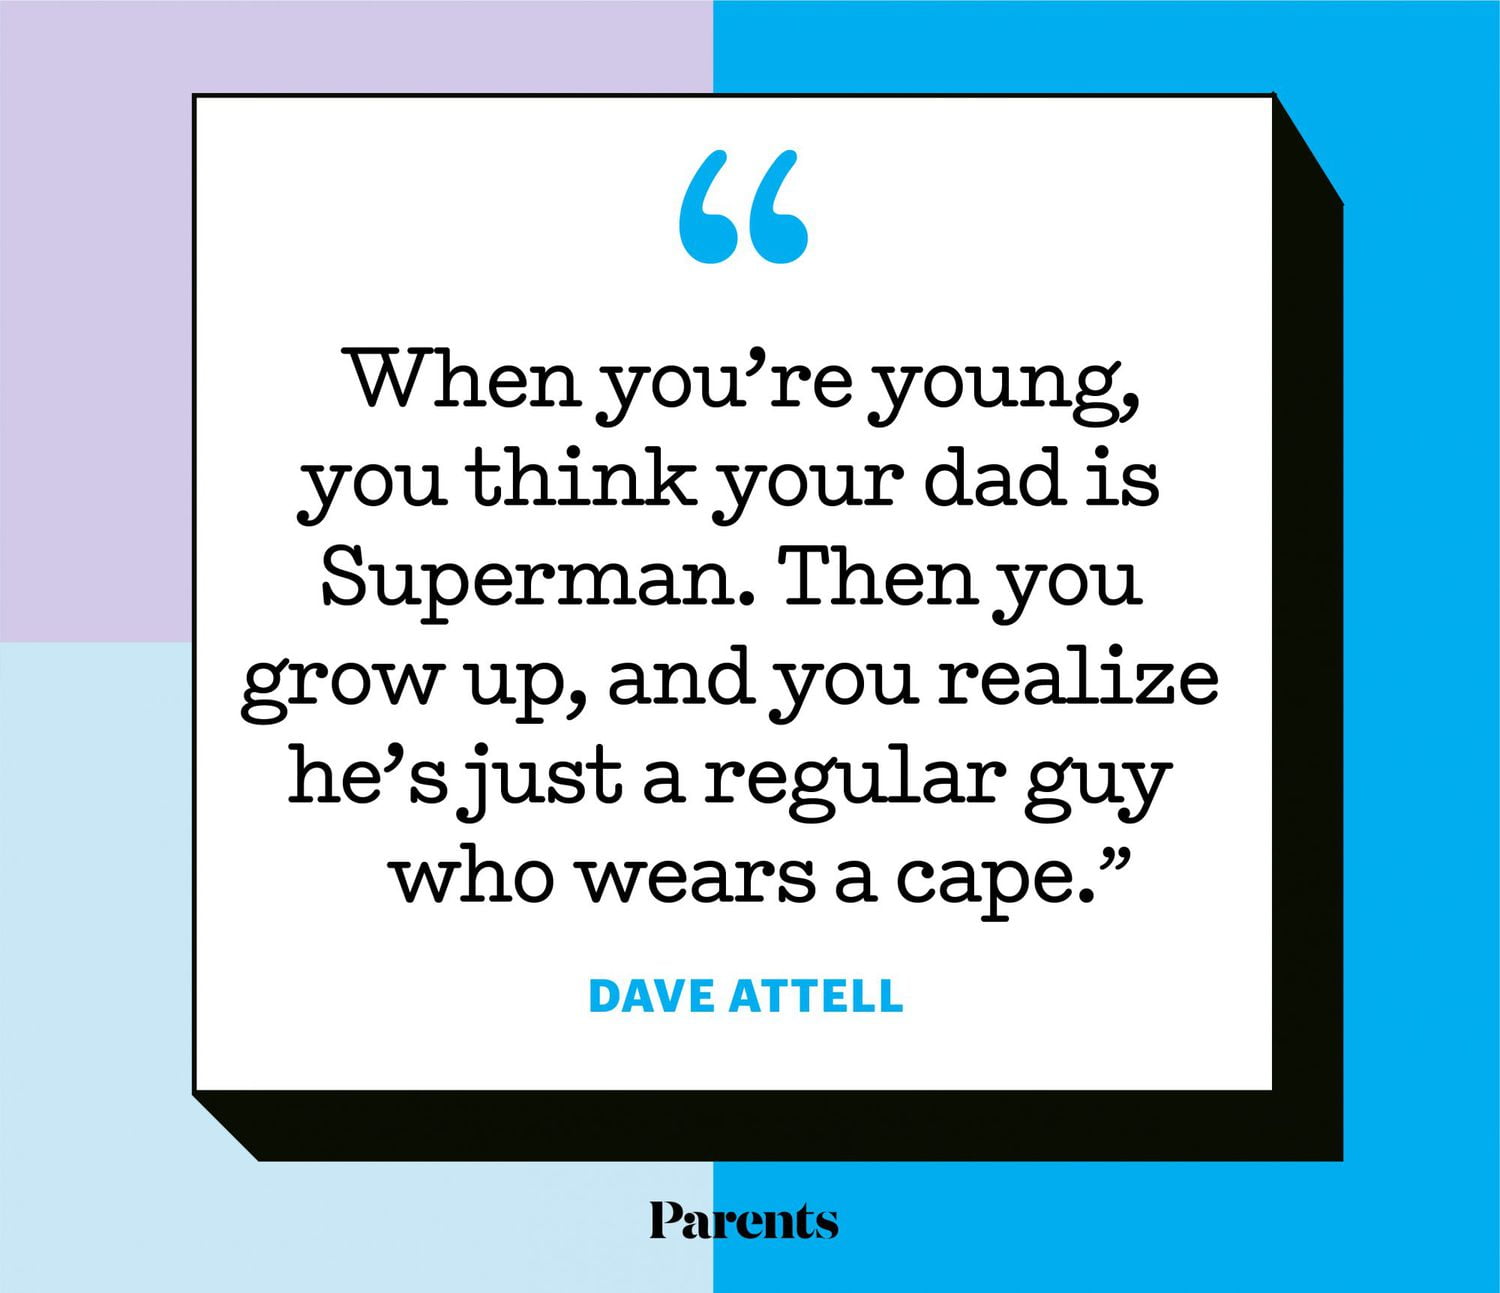 10 Reasons Why Celebrating Father's Day Might Be Perceived as a Waste of Time and Effort